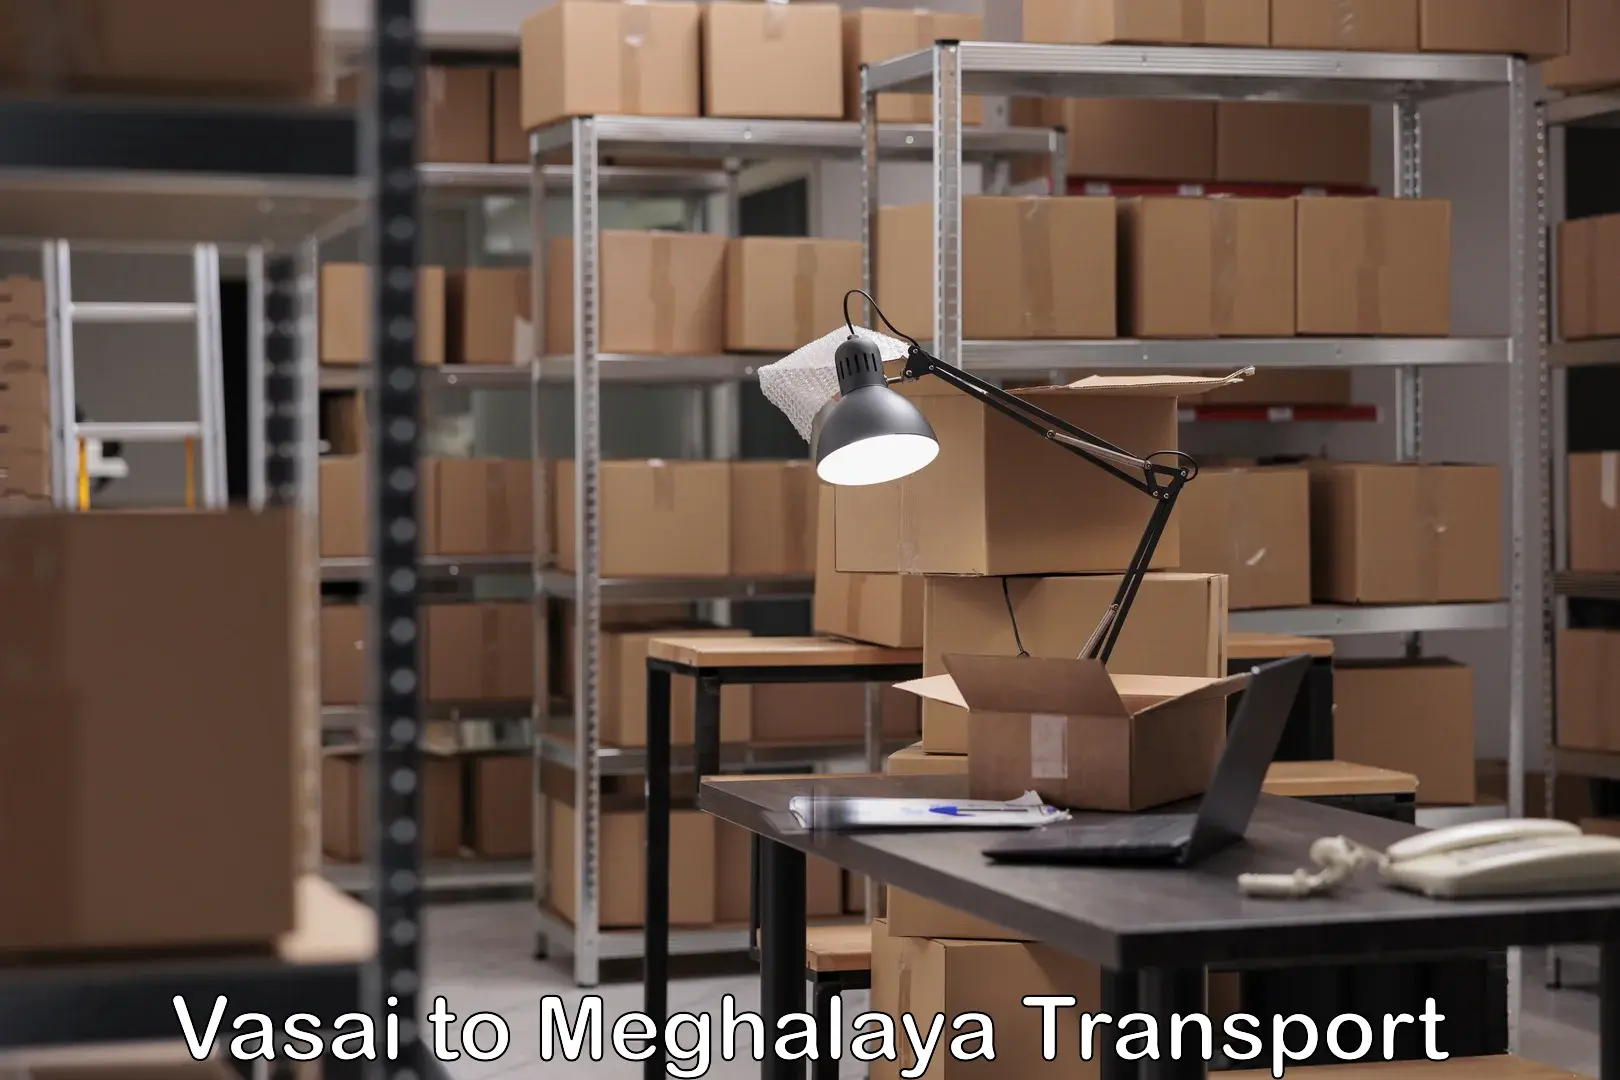 Goods delivery service Vasai to Meghalaya